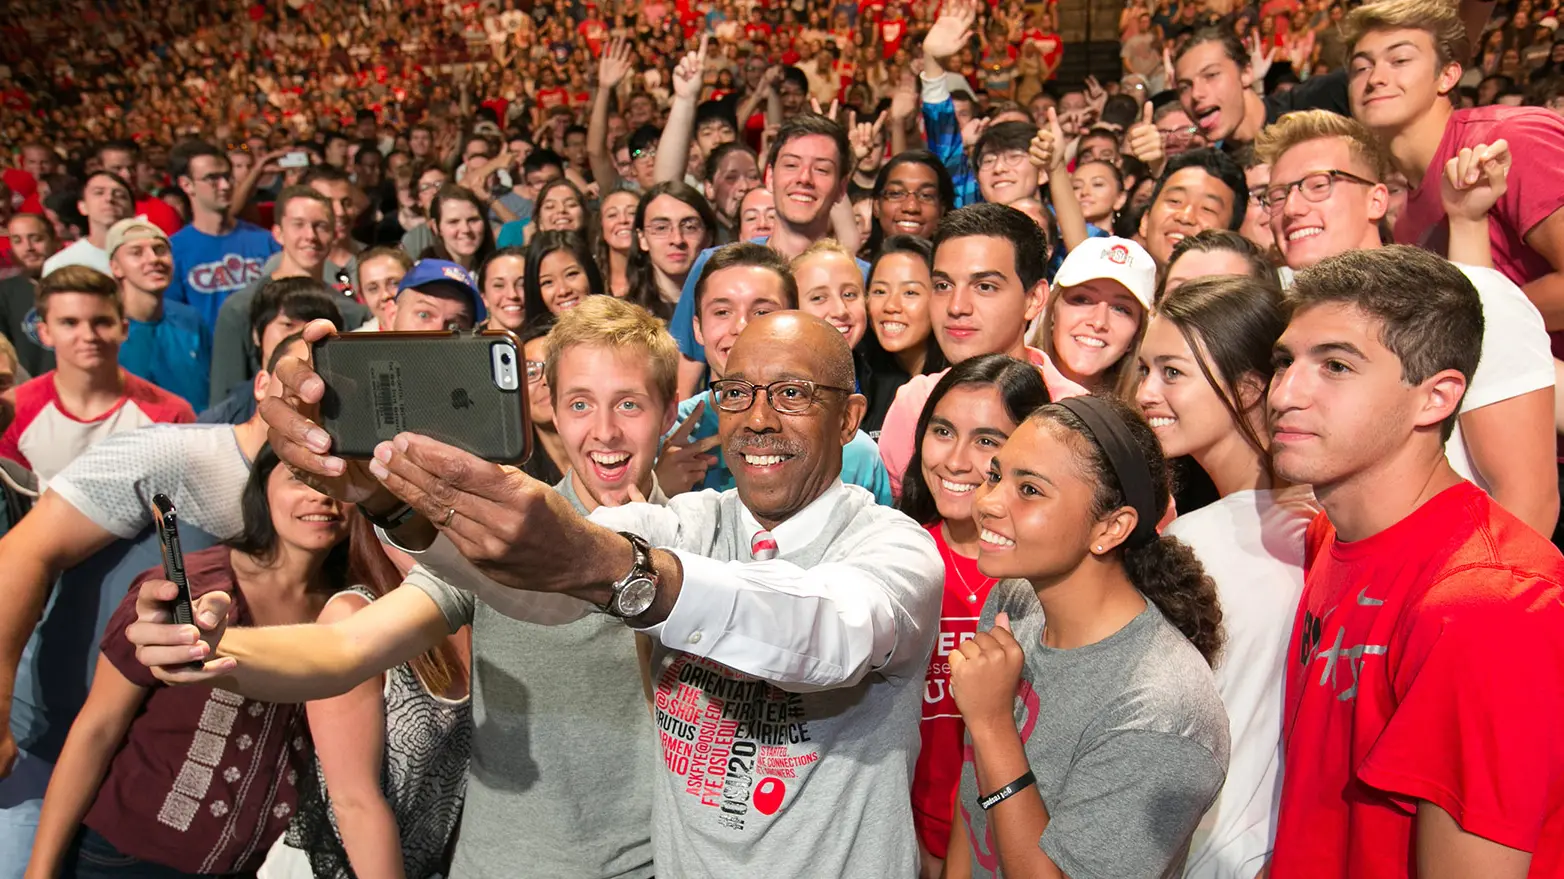 President with phone camera takes selfie with huge group of students surrounding